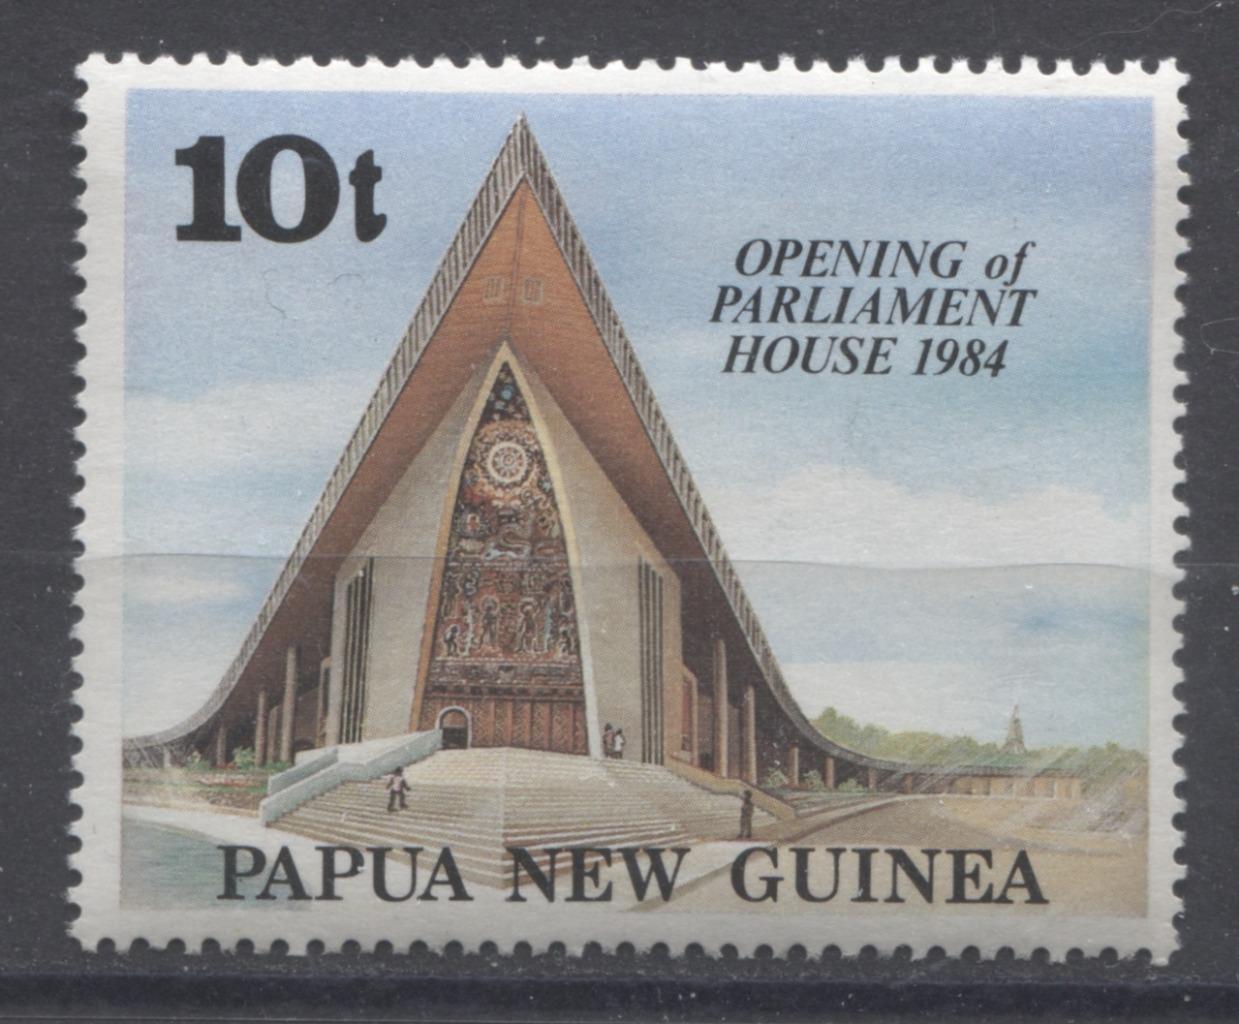 Papua New Guinea #602 1984 Opening of Parliament House Issue VFNH Brixton Chrome 